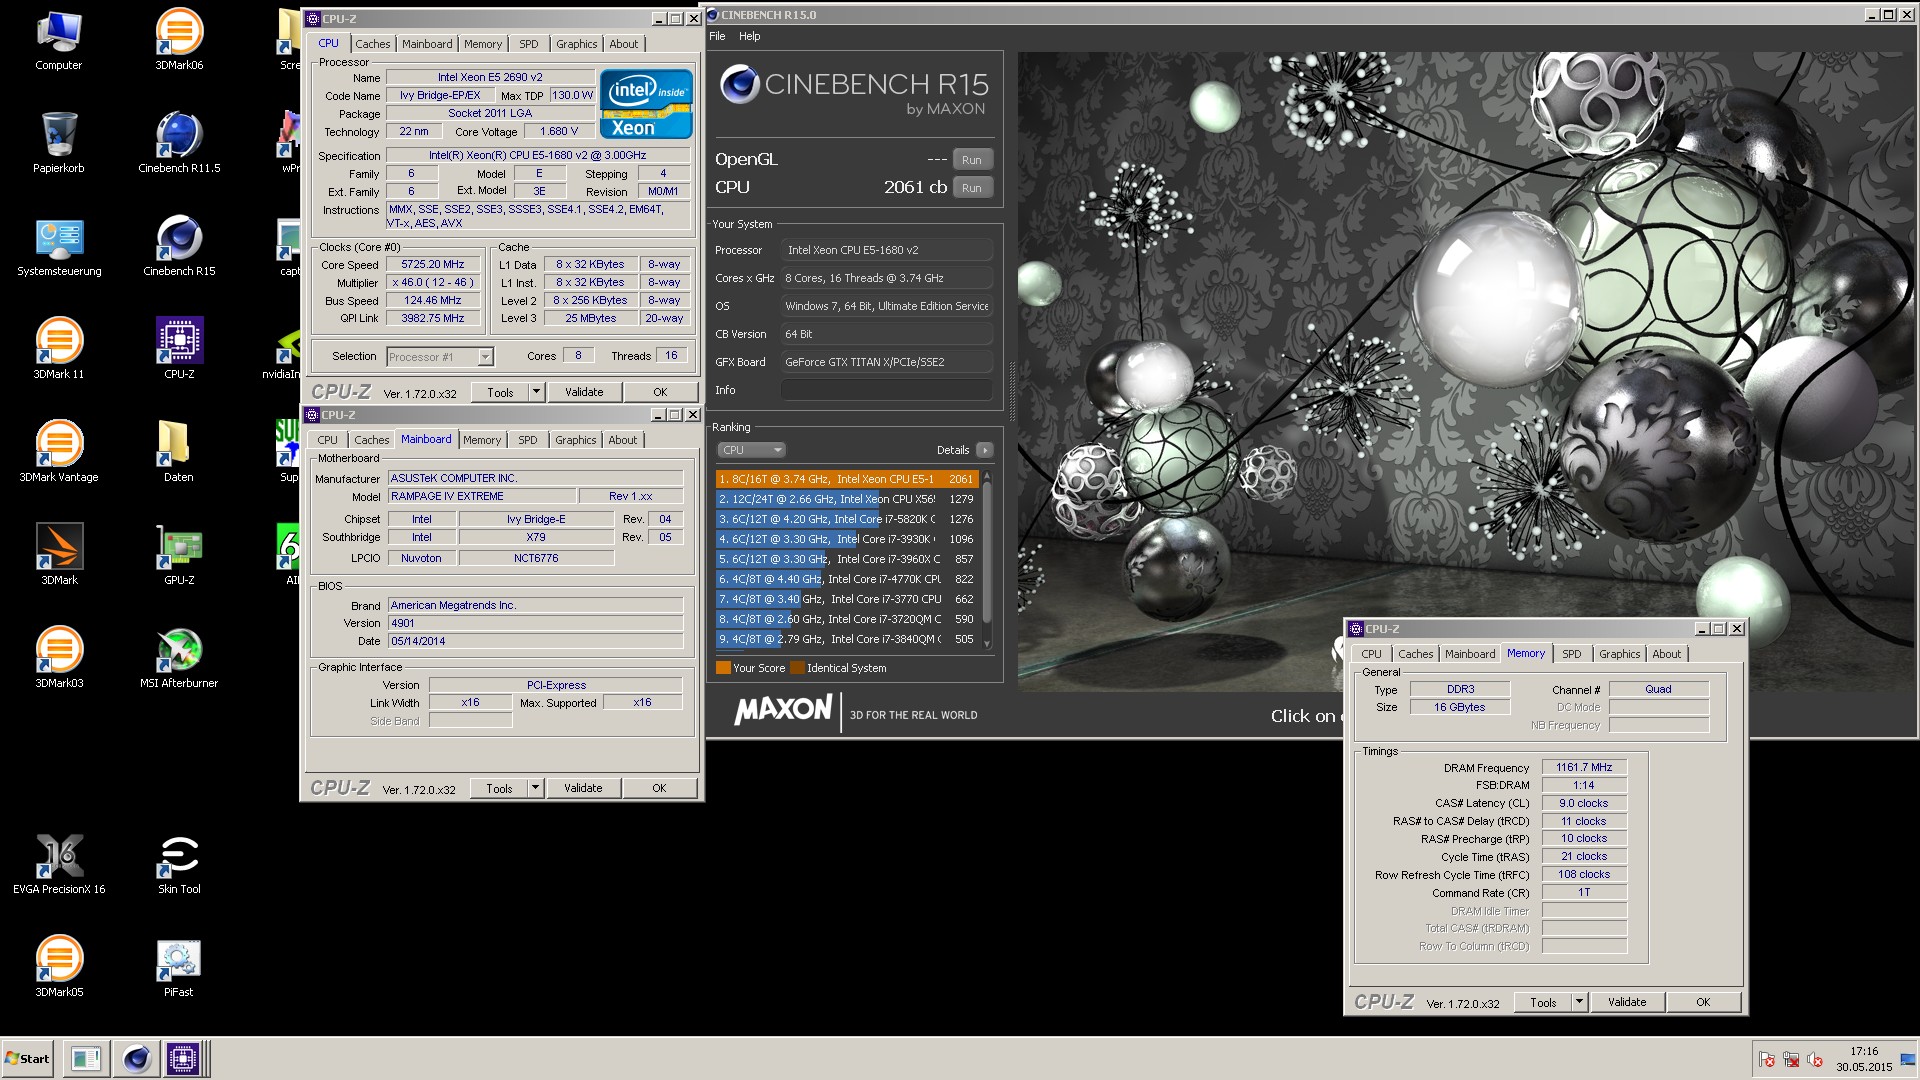 BenchBrothers.de`s Cinebench - R15 score: 2061 cb with a Xeon E5 1680 v2